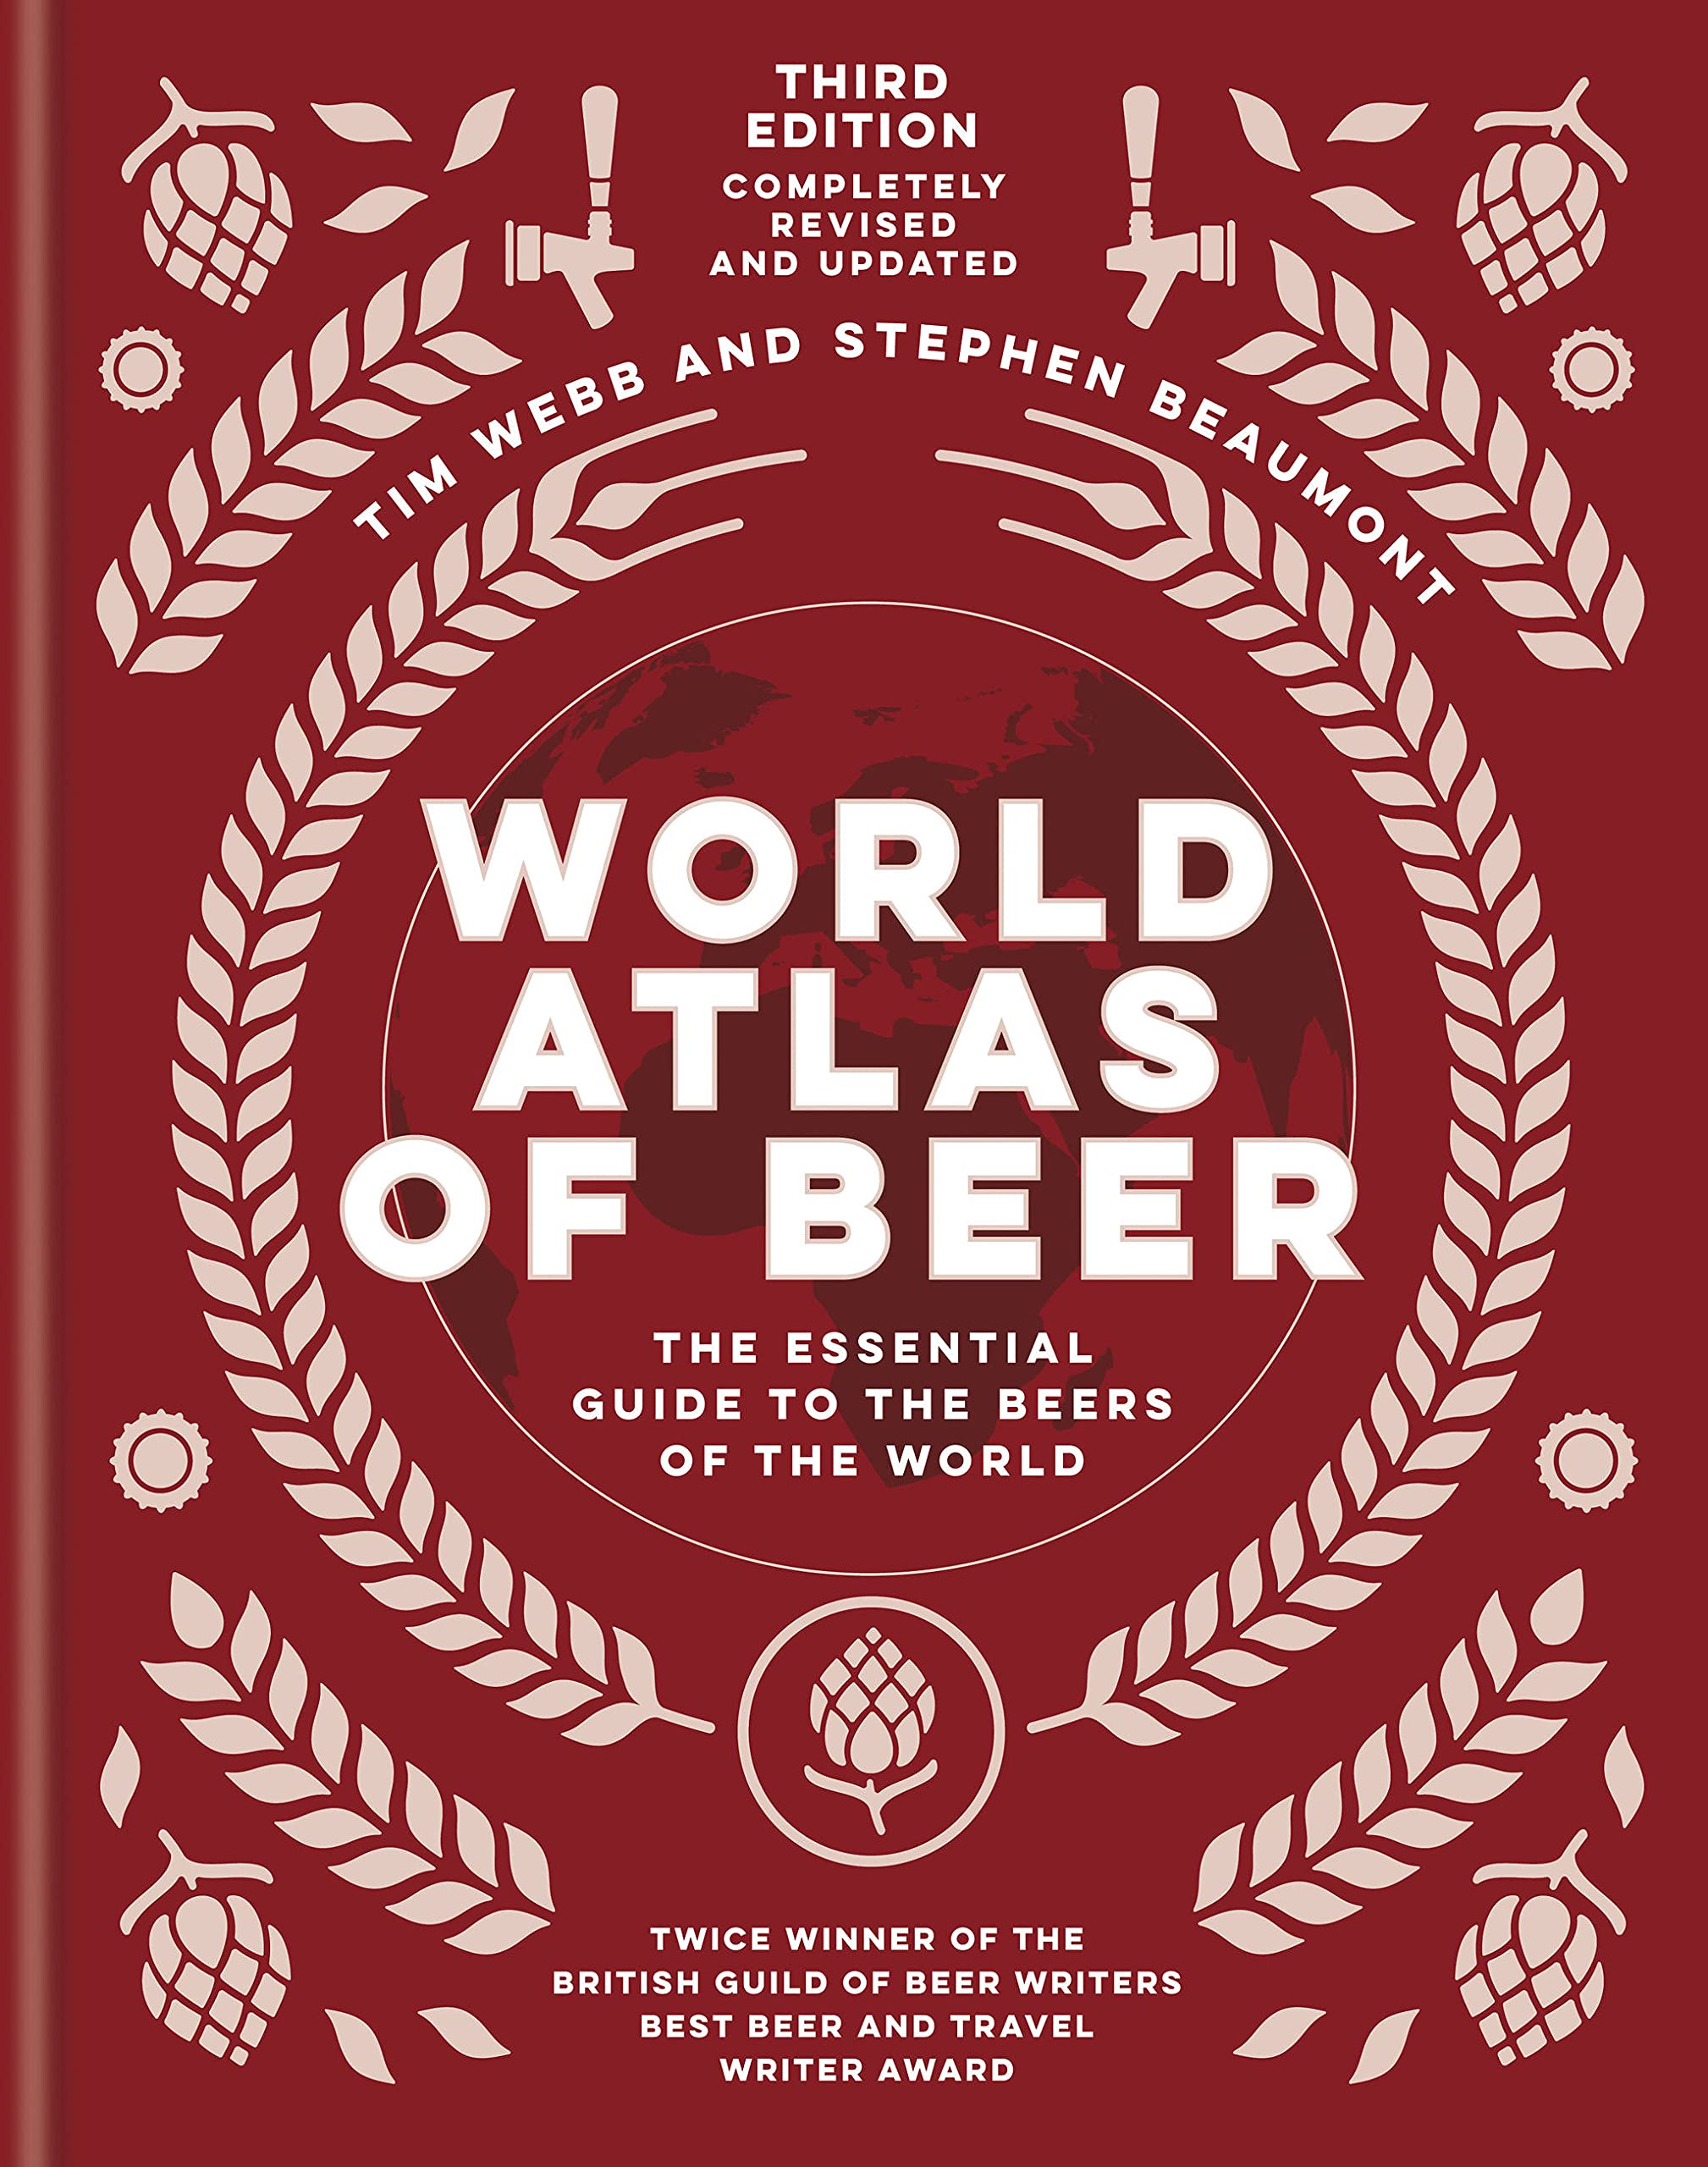 World Atlas of Beer: The Essential Guide to the Beers of the World (Tim Webb, Stephen Beaumont)